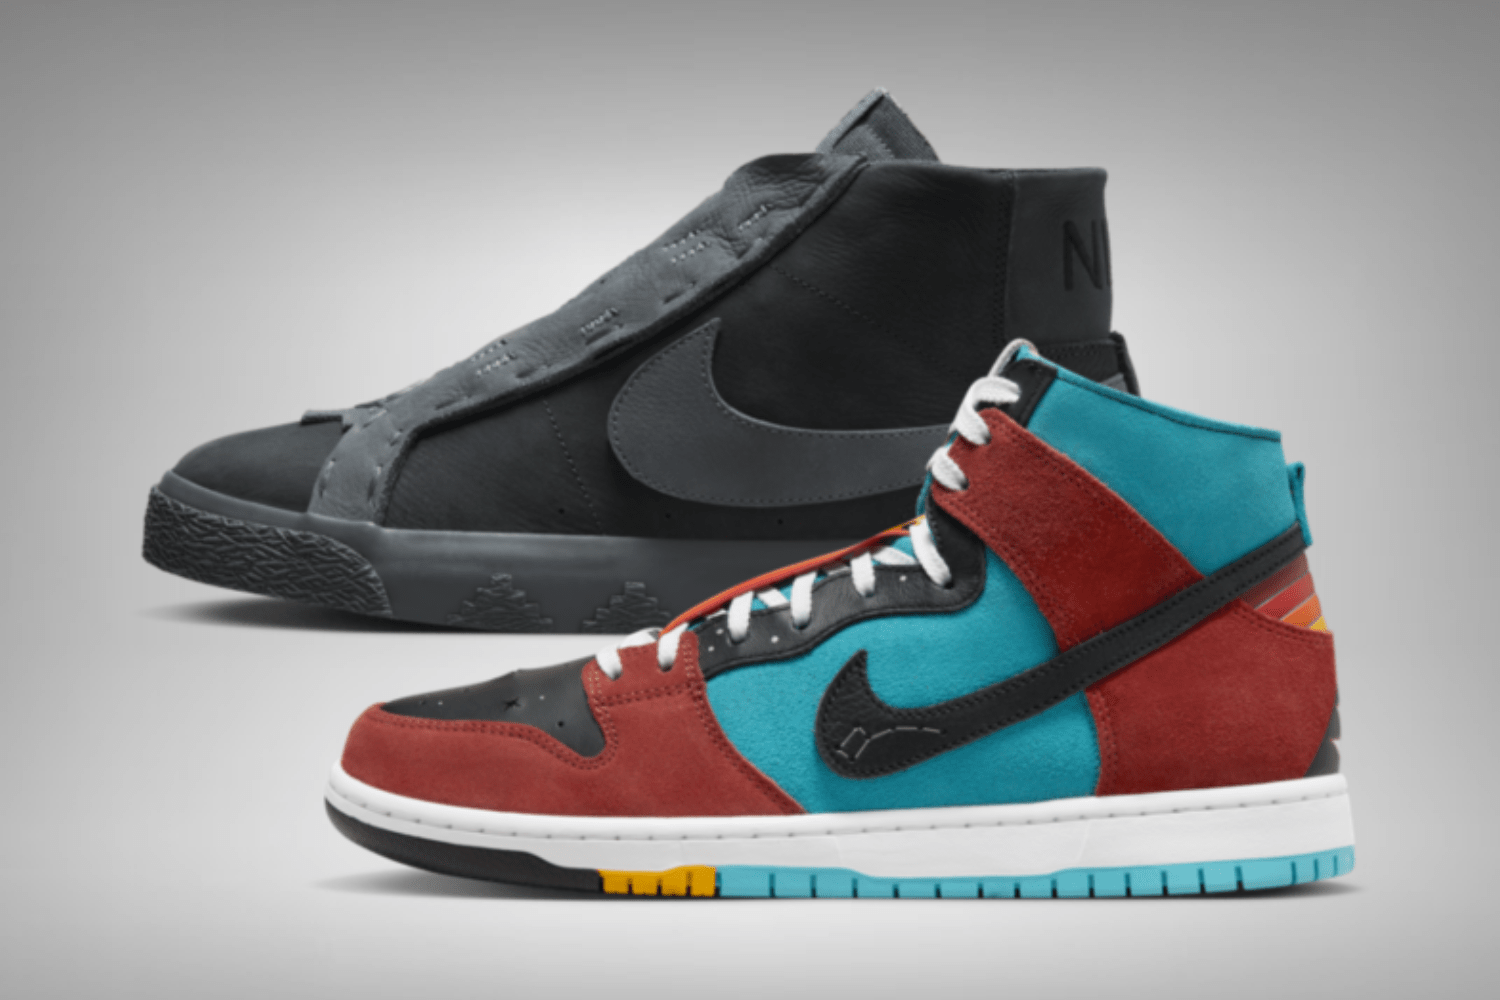 Official images of the Di'orr Greenwood x Nike SB collection